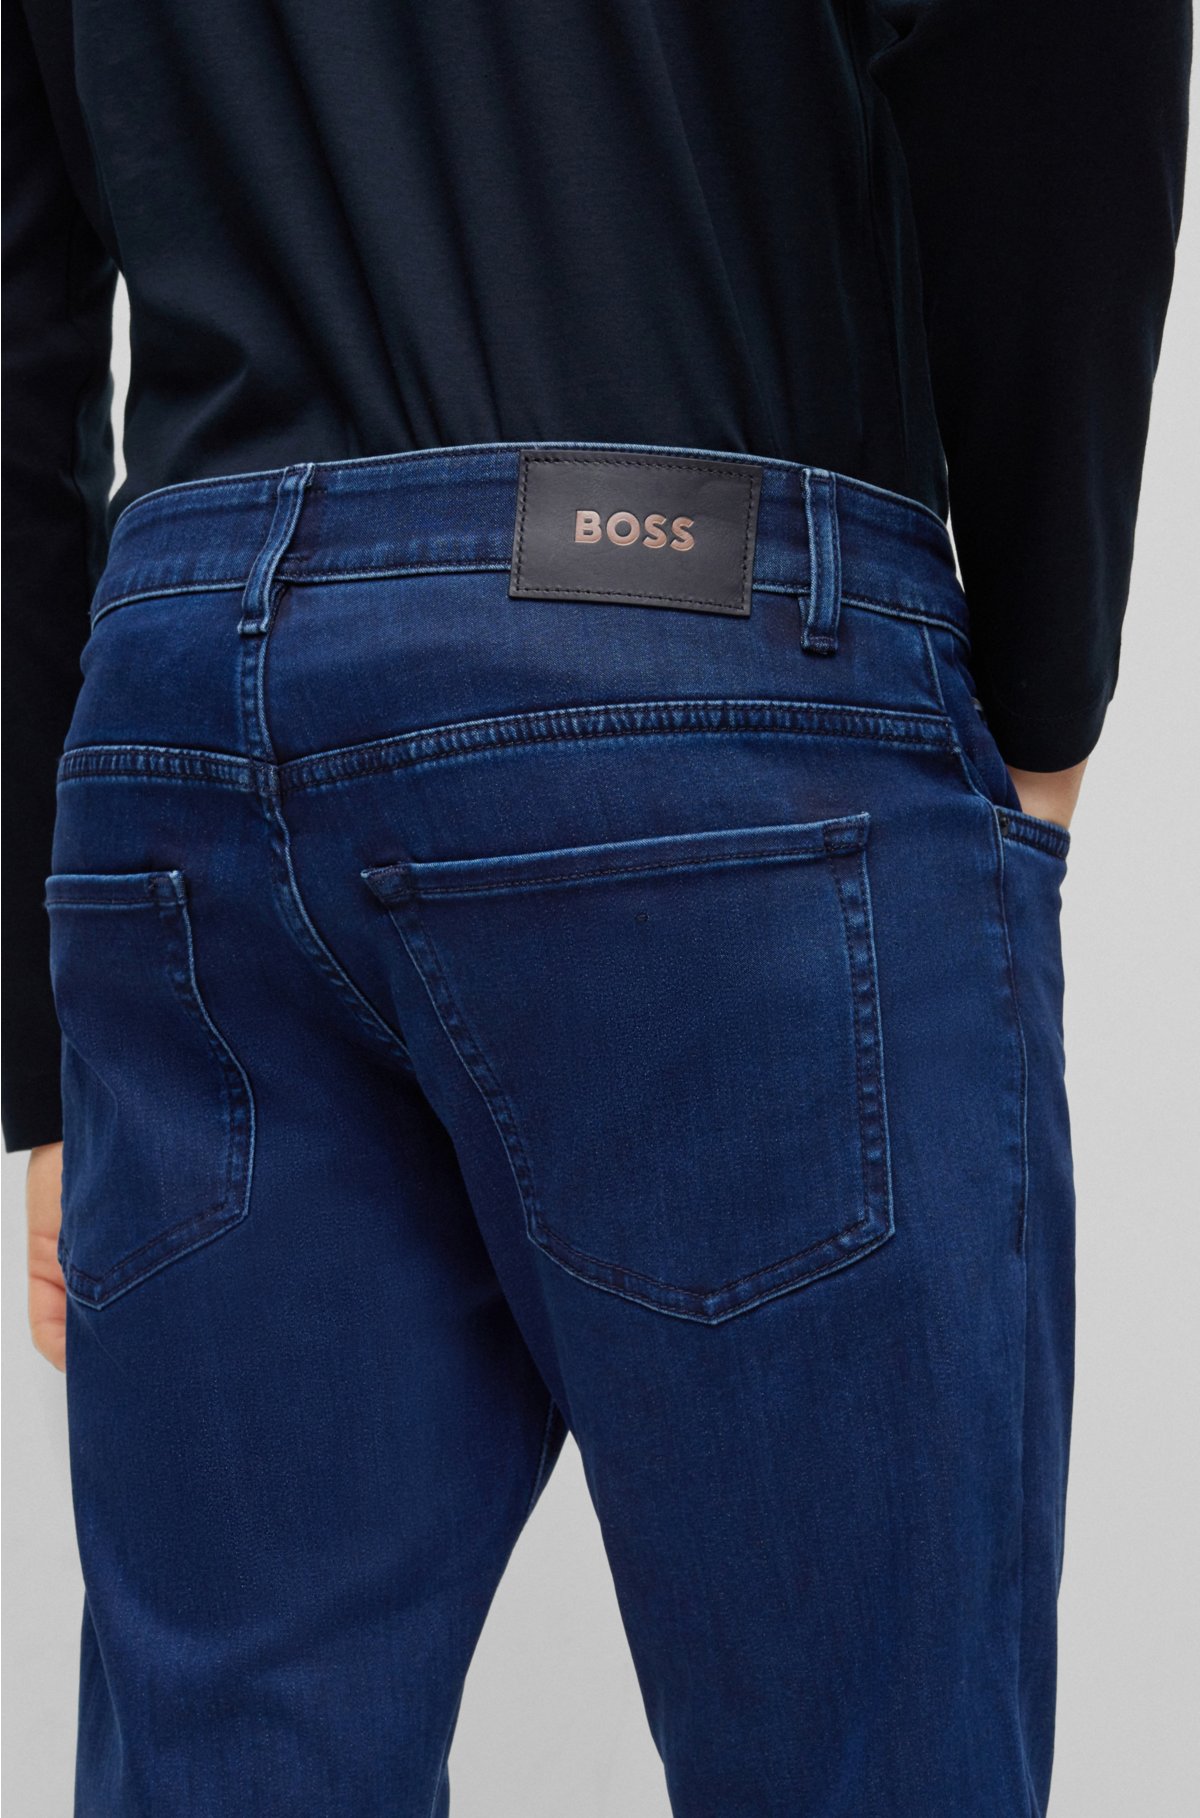 BOSS - Slim-fit jeans denim blue in satin-touch